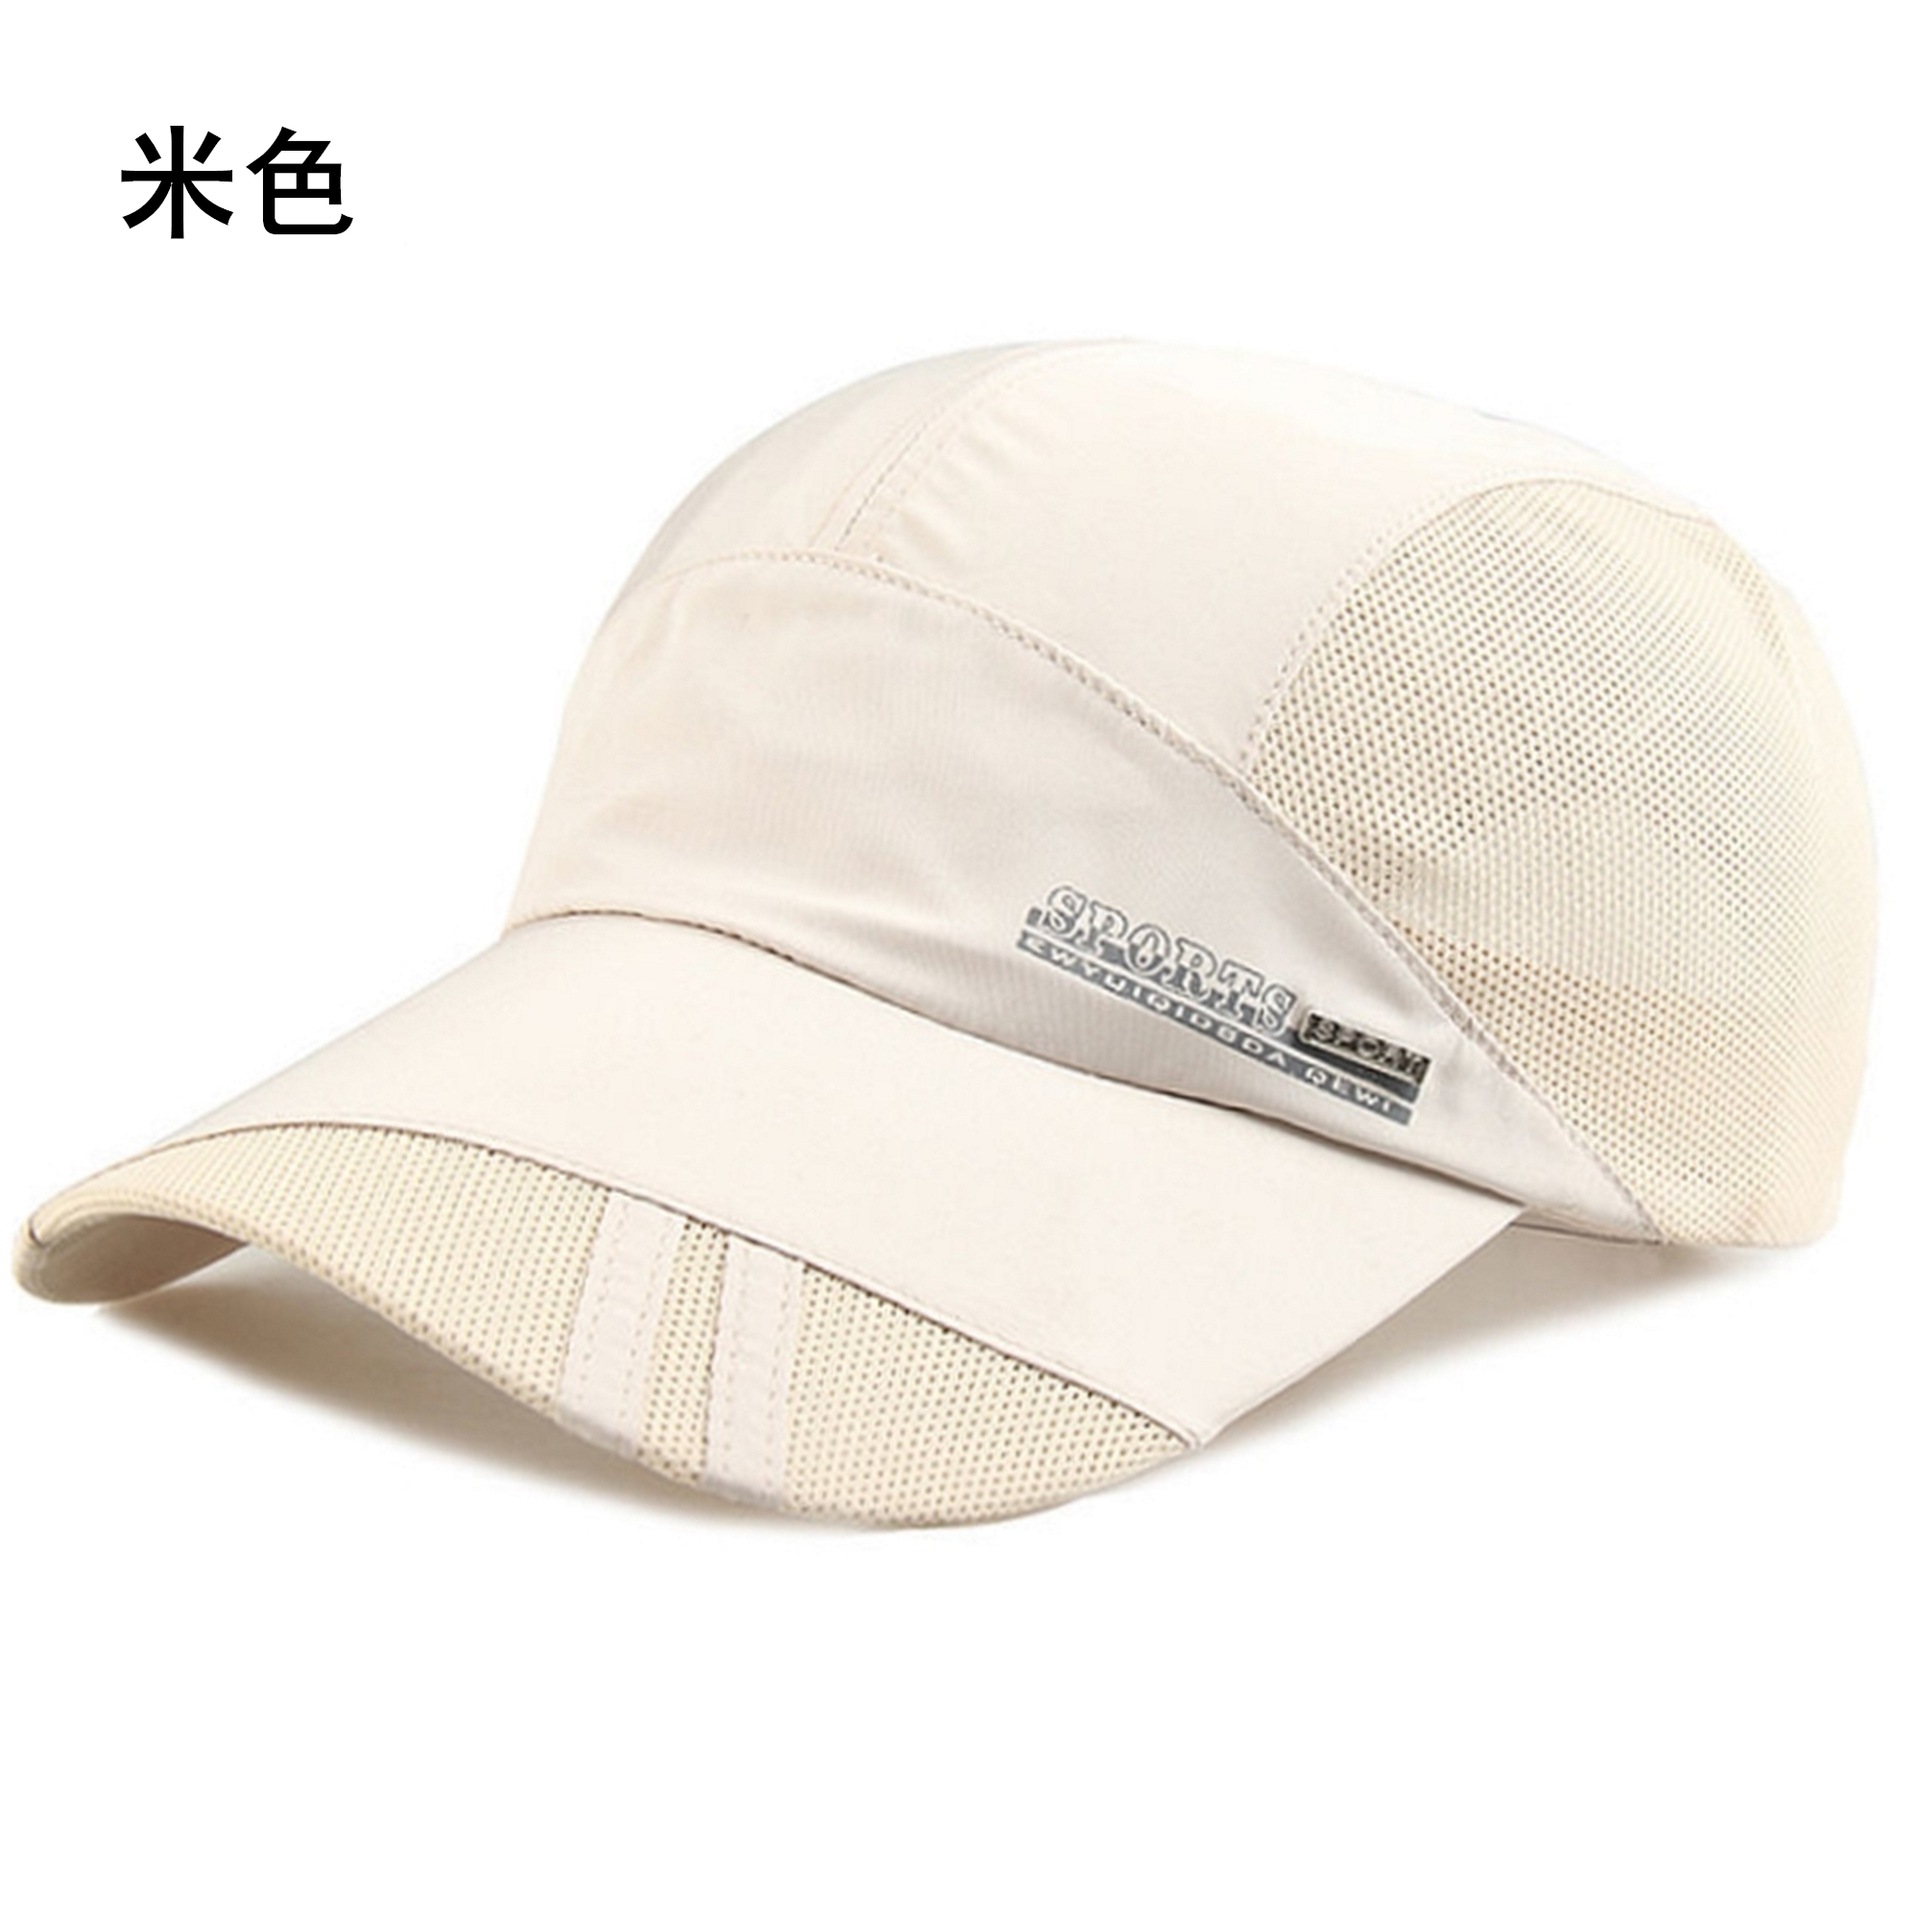 Hat Men's Spring and Summer Lightweight Sun-Poof Peaked Cap Breathable Outdoor Leisure Fishing Sun Protection Baseball Sun Hat